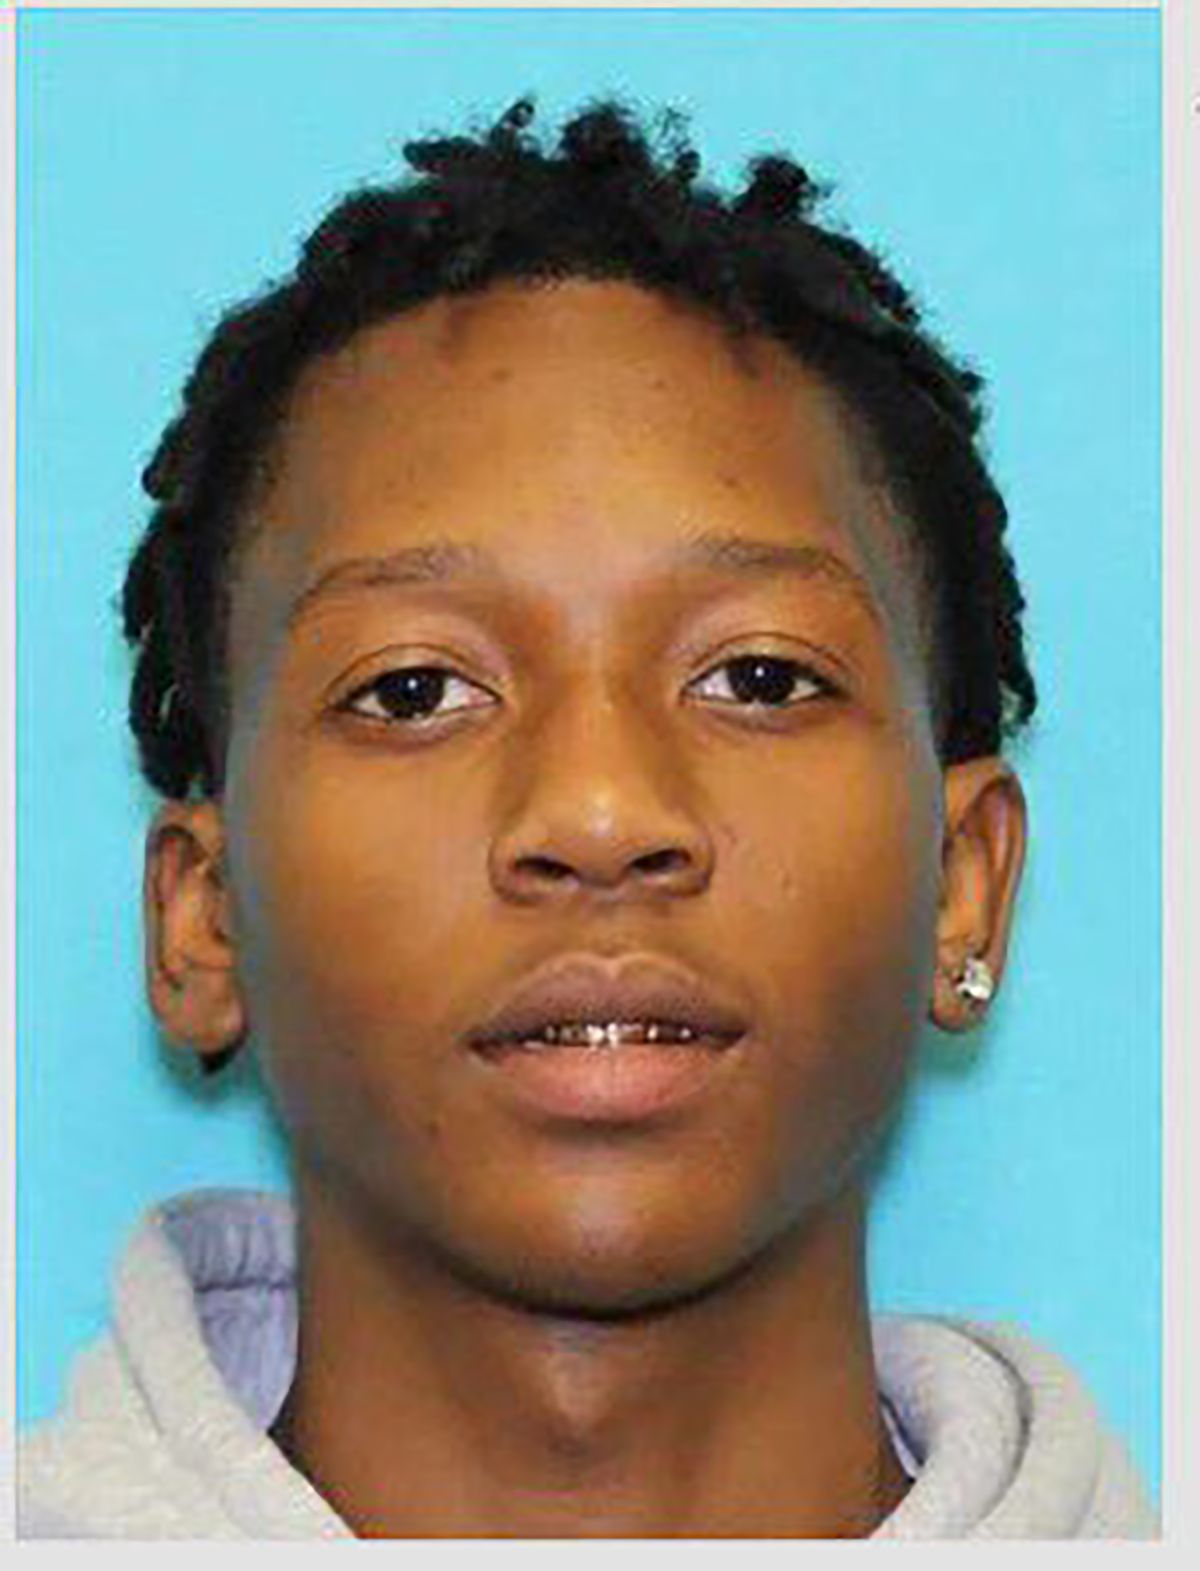 This undated photo provided by the Arlington Police Department in Arlington, Texas shows Timothy George Simpkins. Police are searching for Simpkins, who is the suspected shooter at a Dallas-area high school, leaving four people injured before fleeing, authorities said Wednesday, Oct. 6, 2021.  (HOGP)